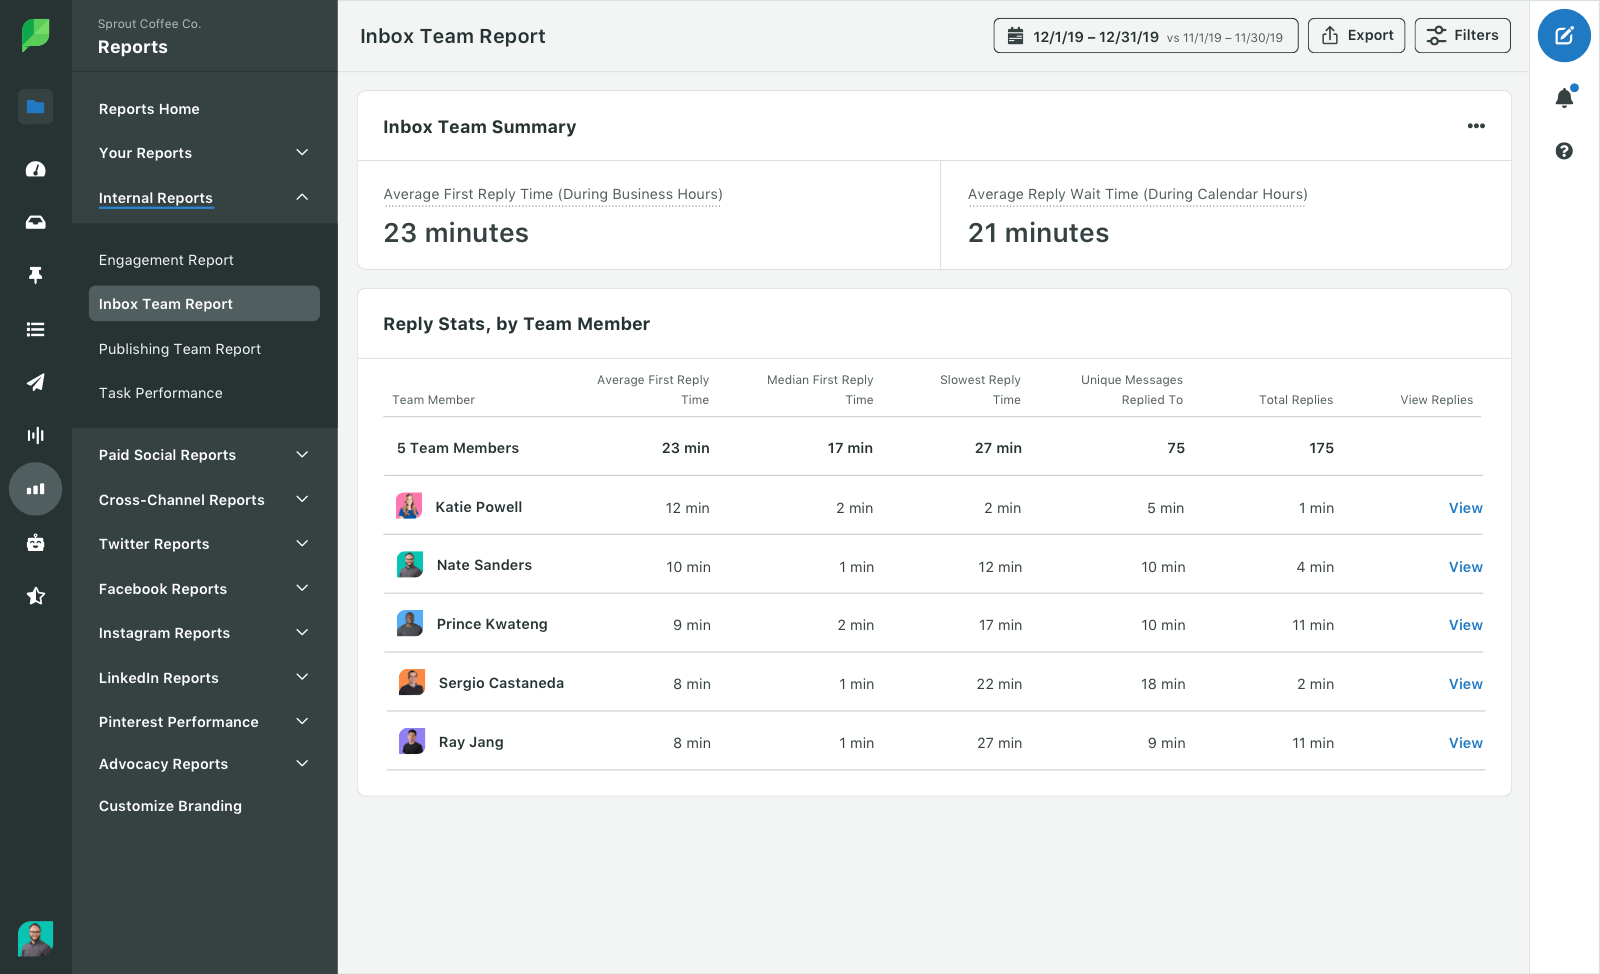 sprout team report showing response times and details